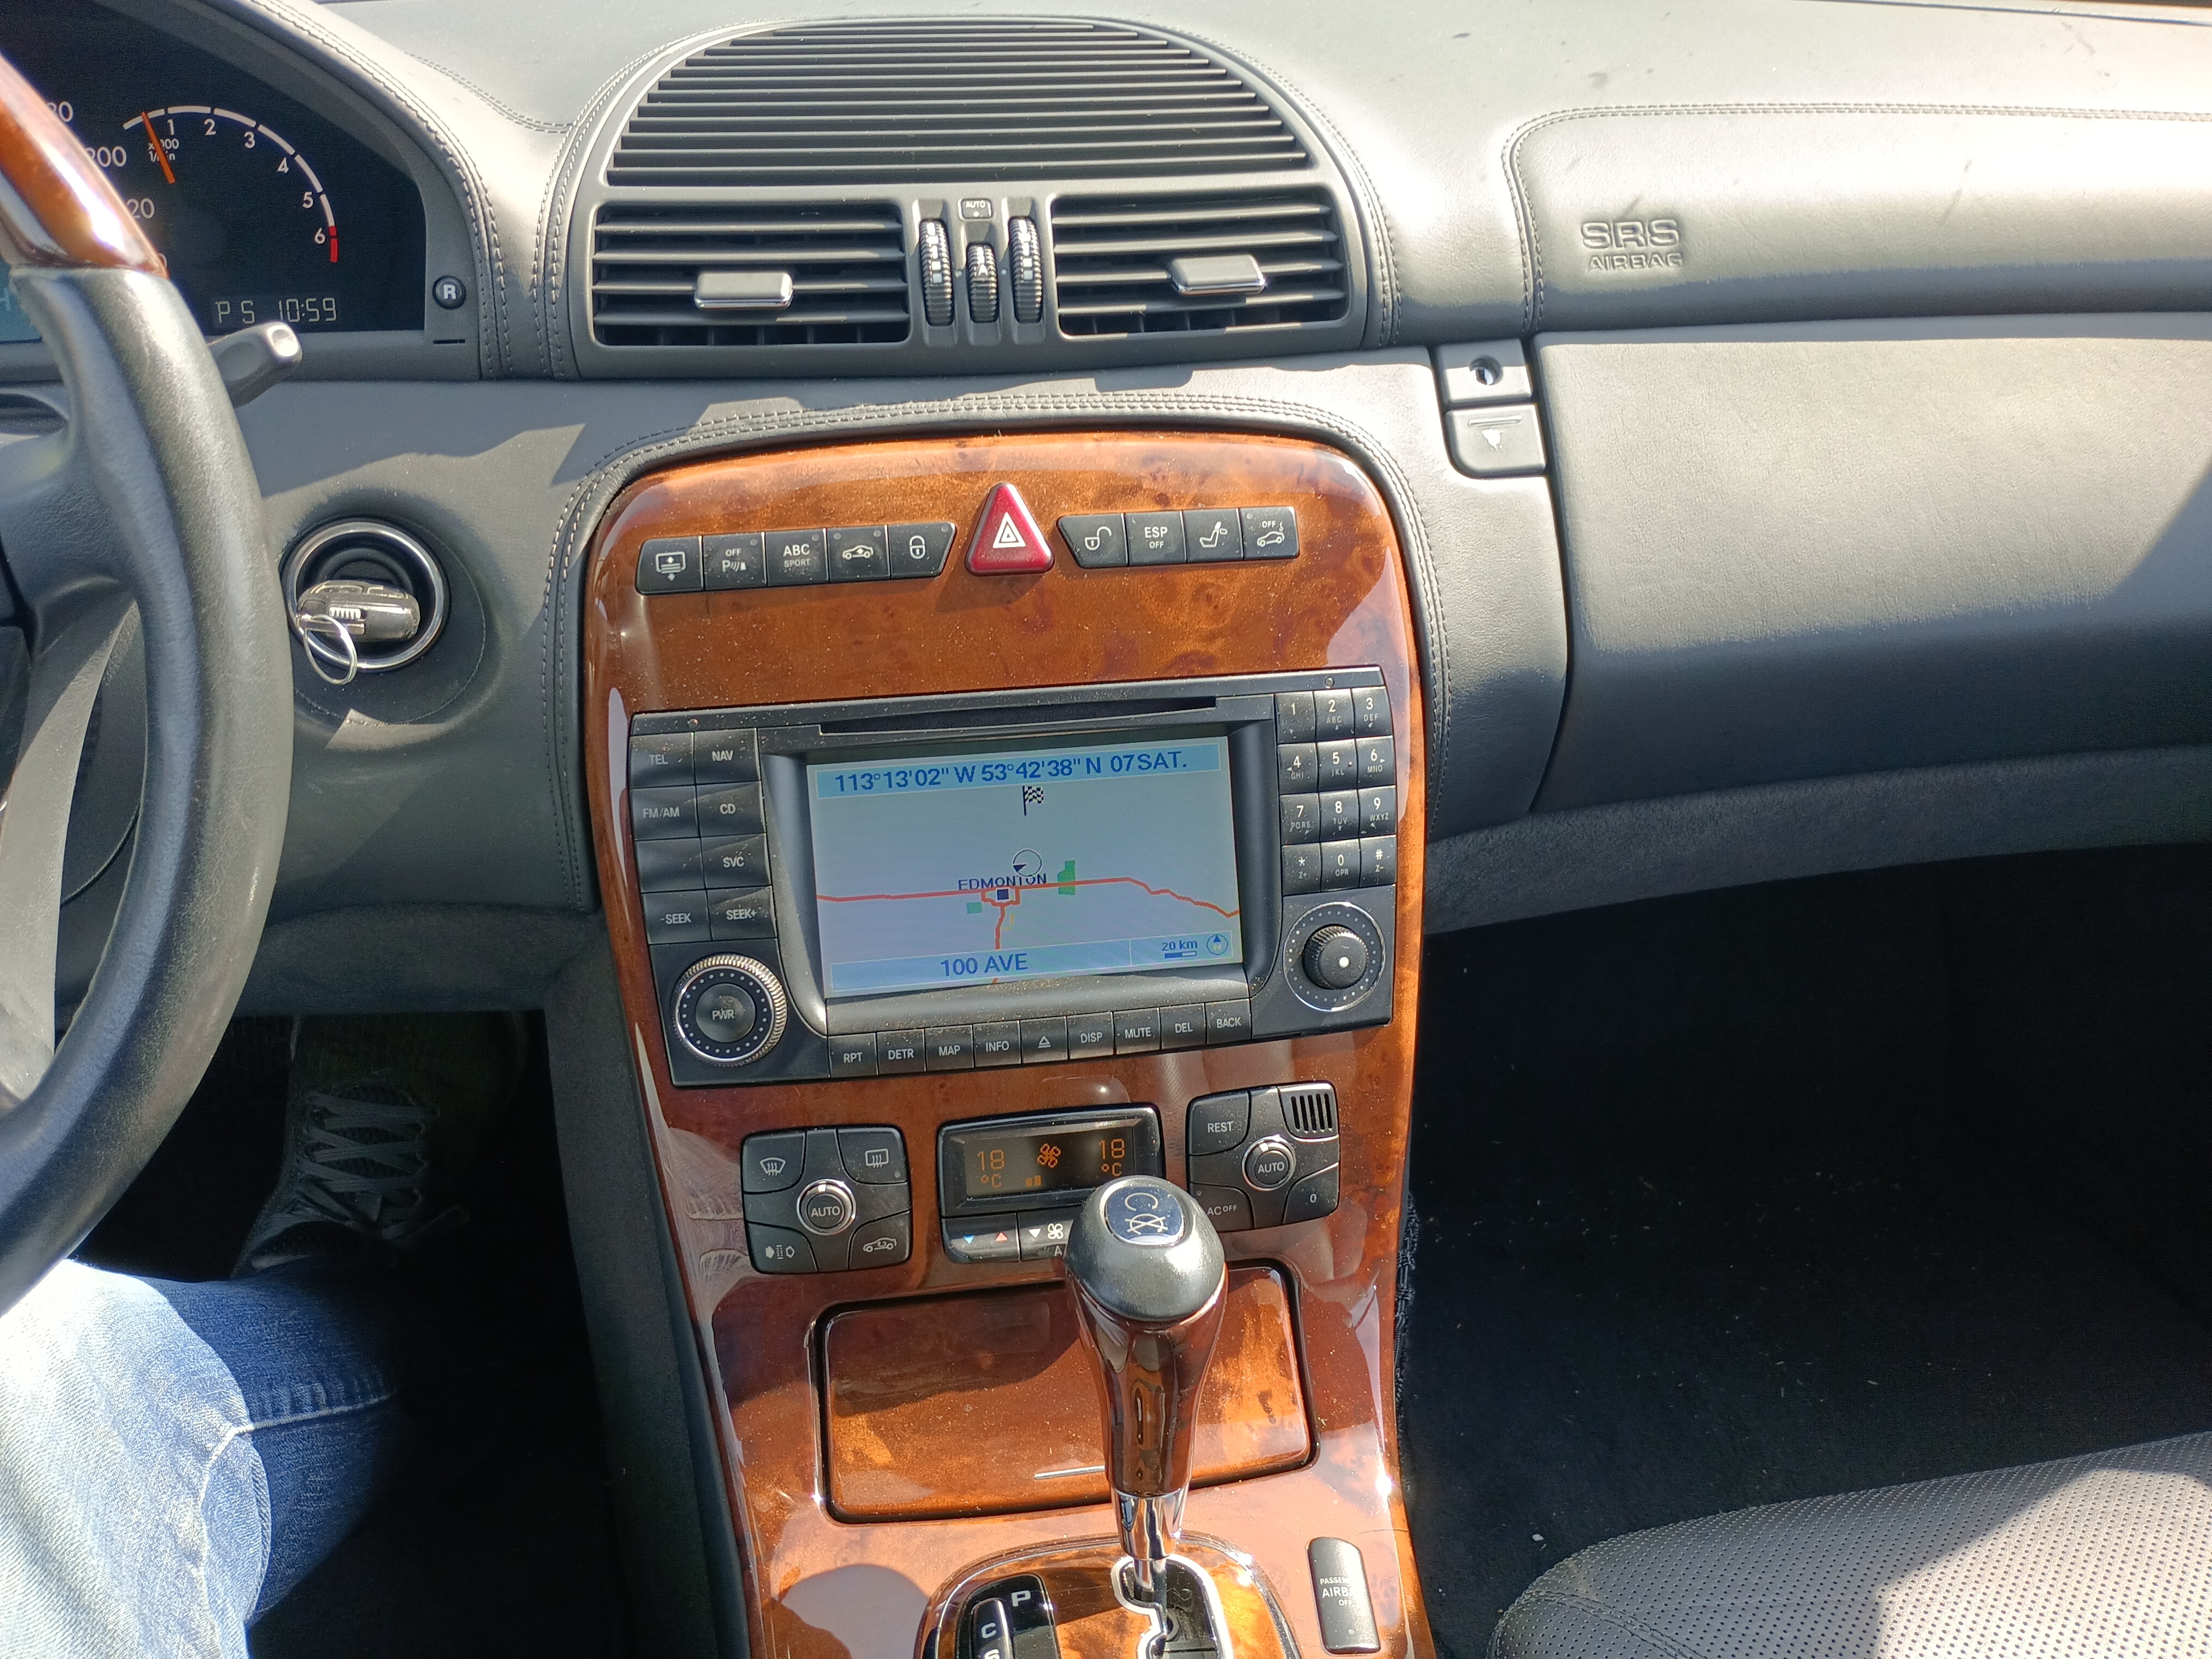 Optional Navigation and Bose stereo. Dual climate controls.